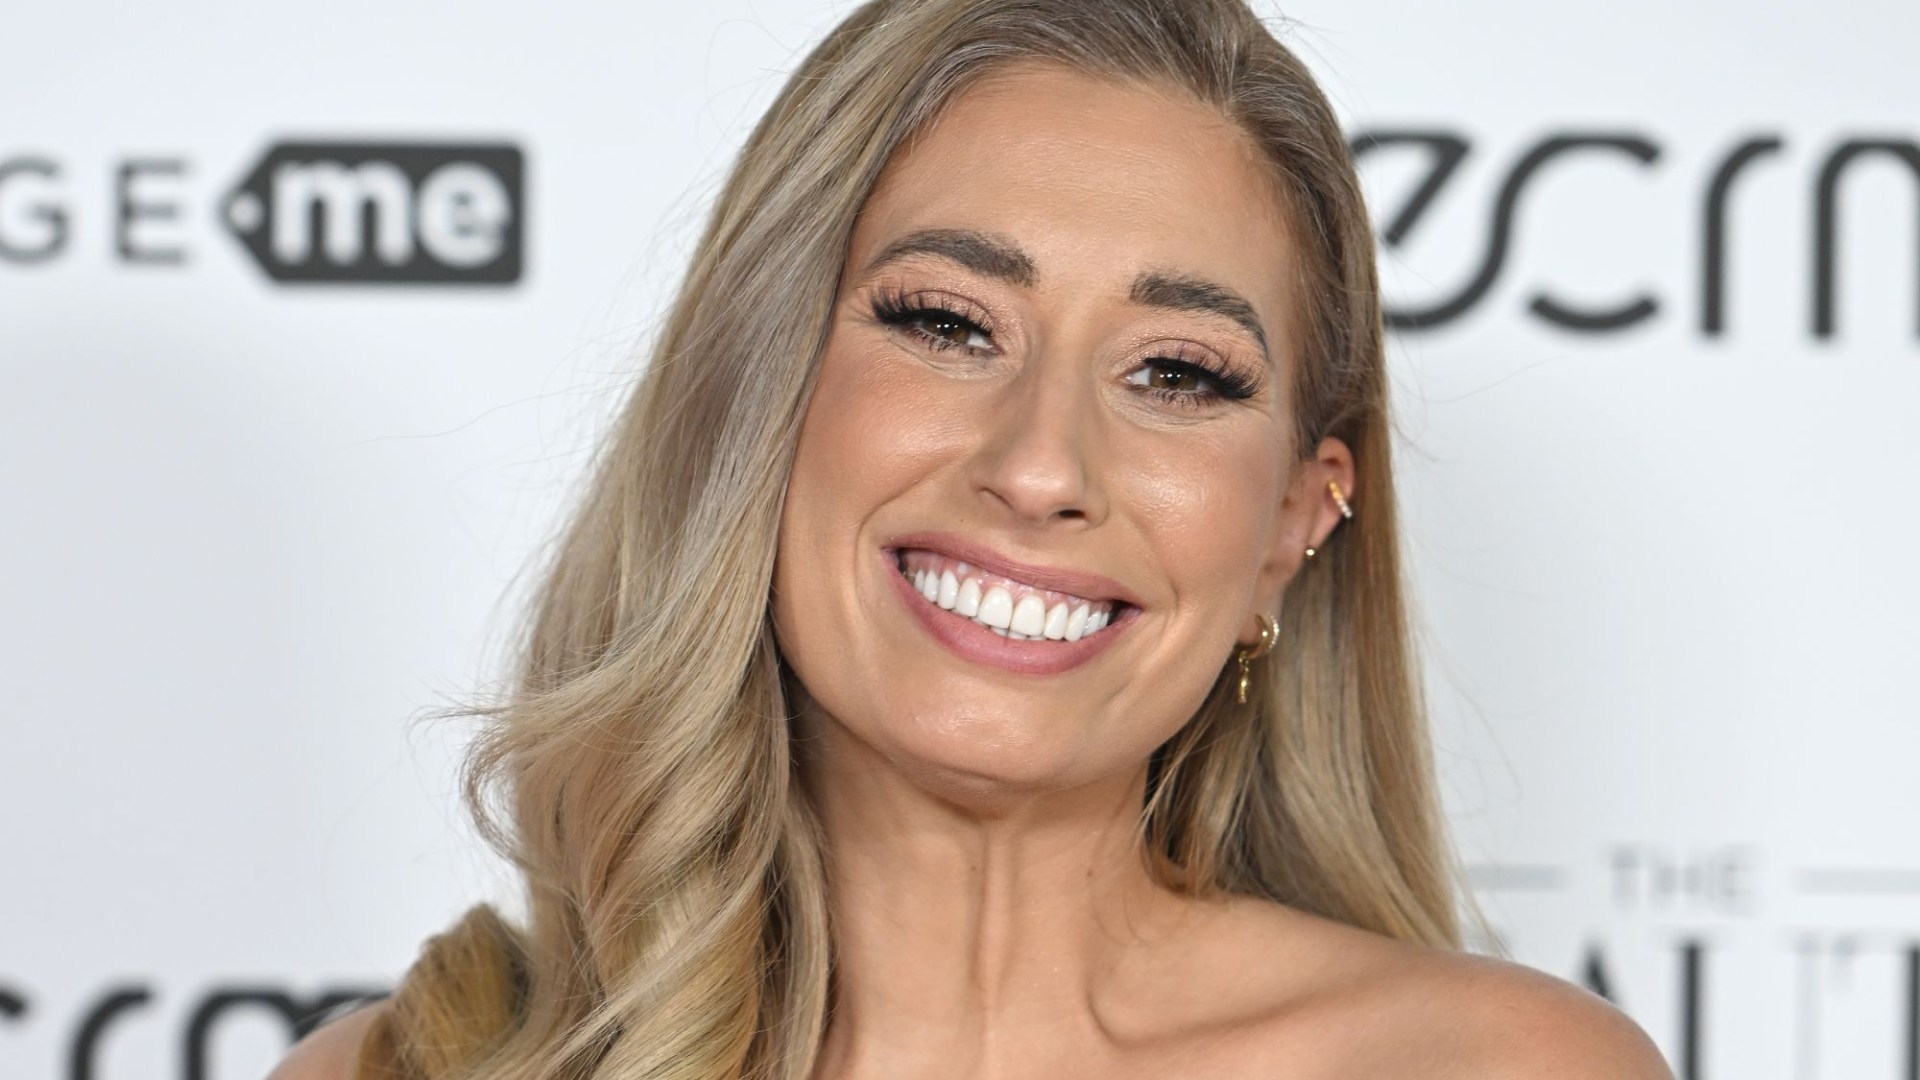 Stacey Solomon Spills on Sex Life with Joe Swash: Intimate Details Revealed!